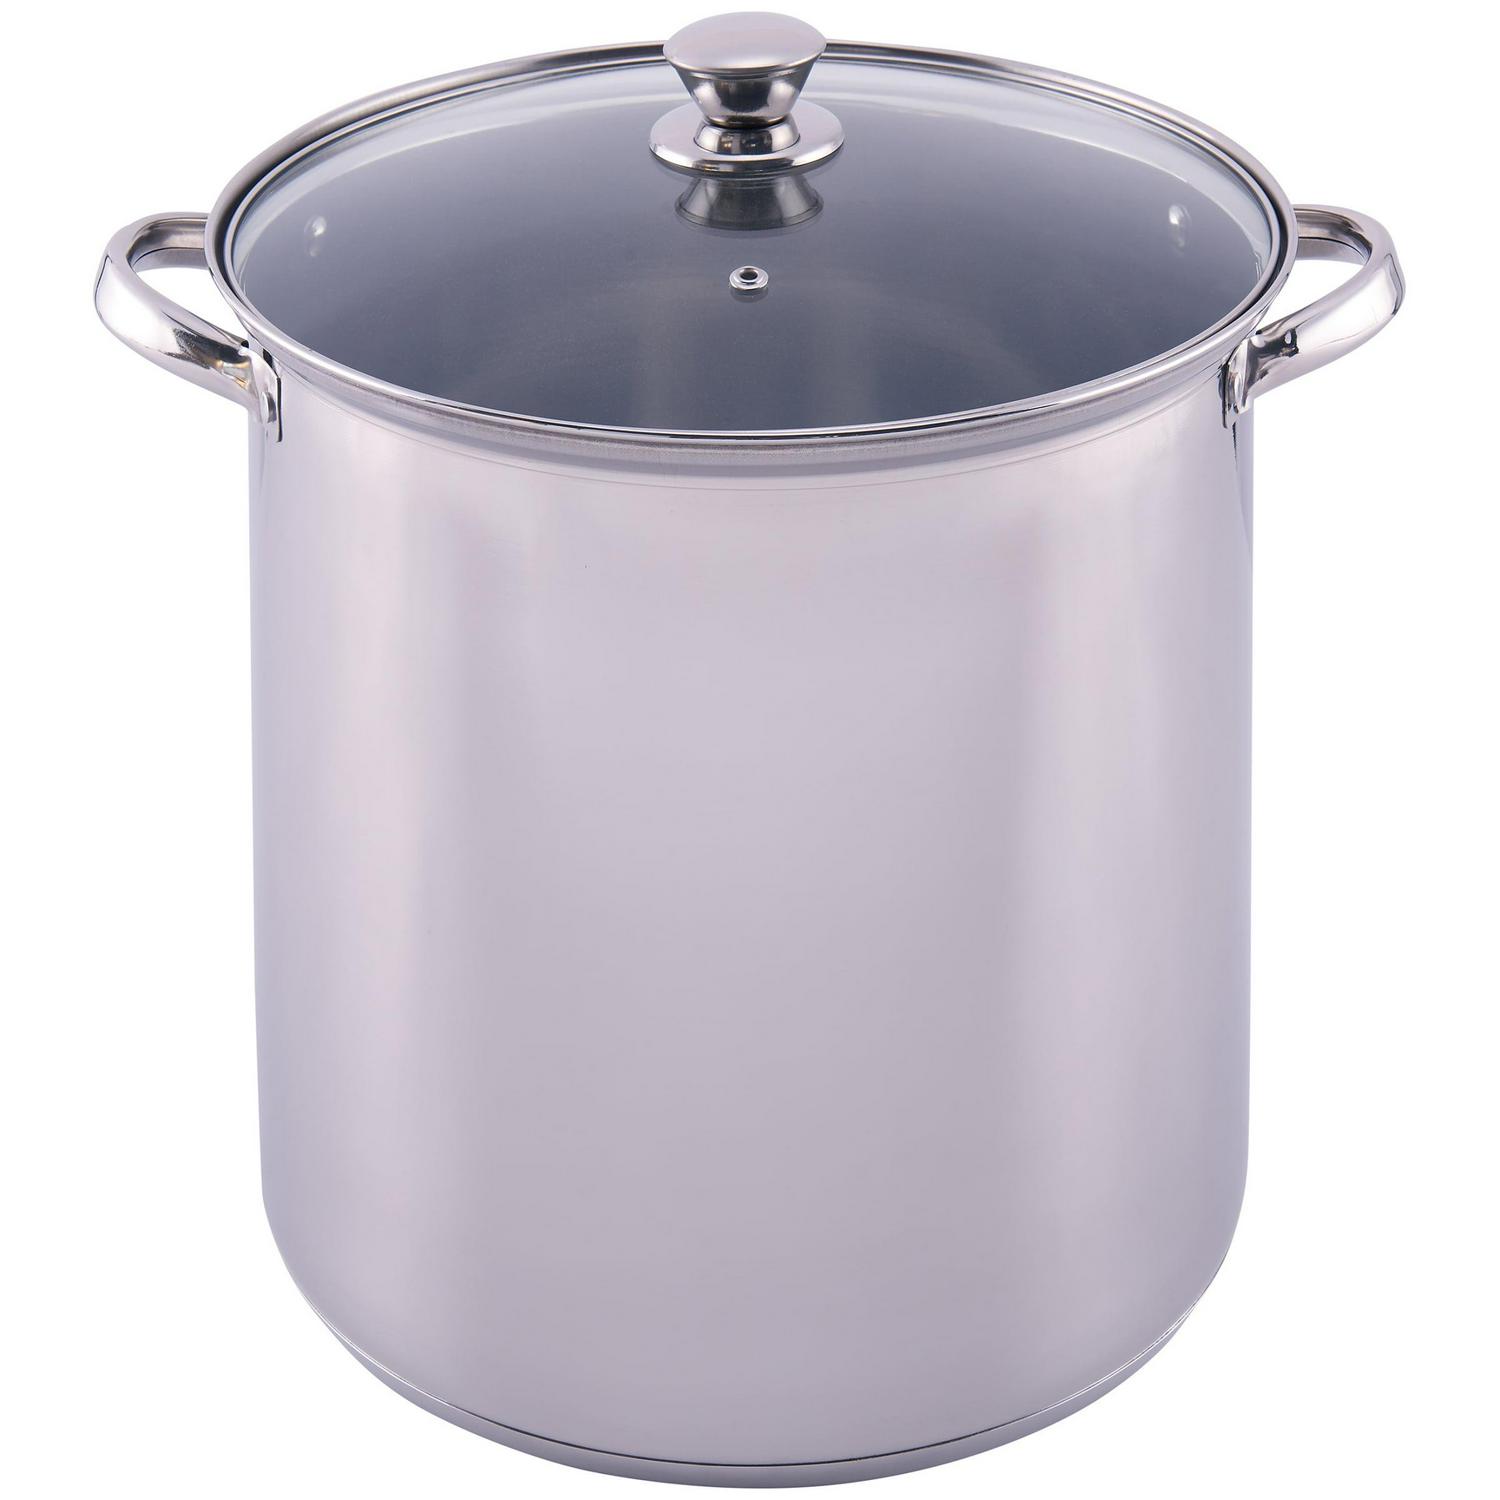 Mainstays Stainless Steel 12, 16 or 20 Quart Stock Pot with Lid | eBay Mainstays Stainless Steel Stock Pot With Lid